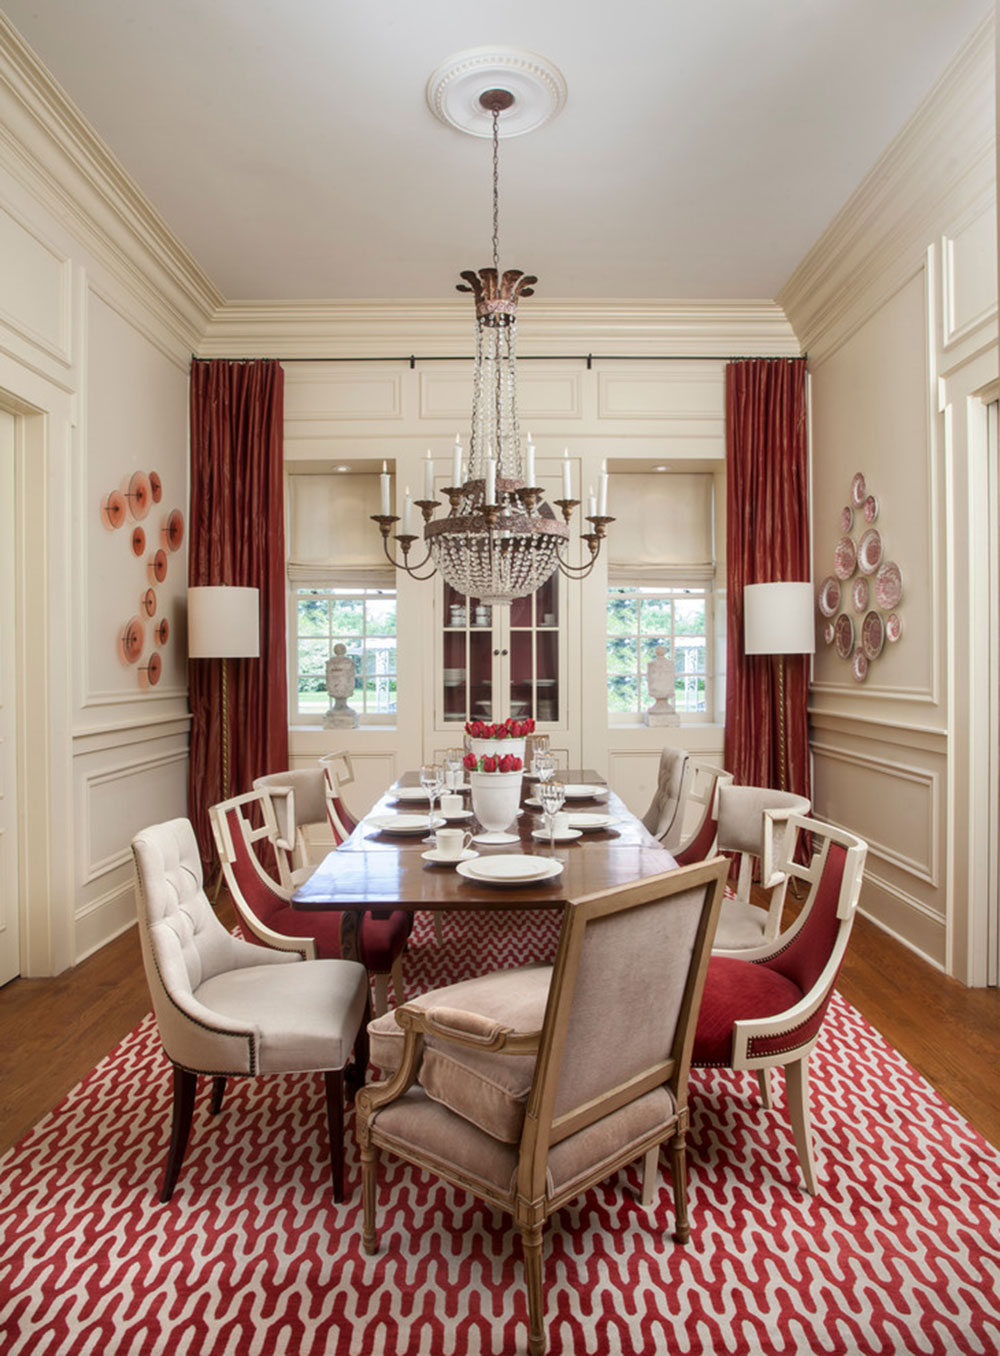 How-To-Choose-A-Chandelier-For-The-Dining-Room12 How To Choose A Chandelier For The Dining Room